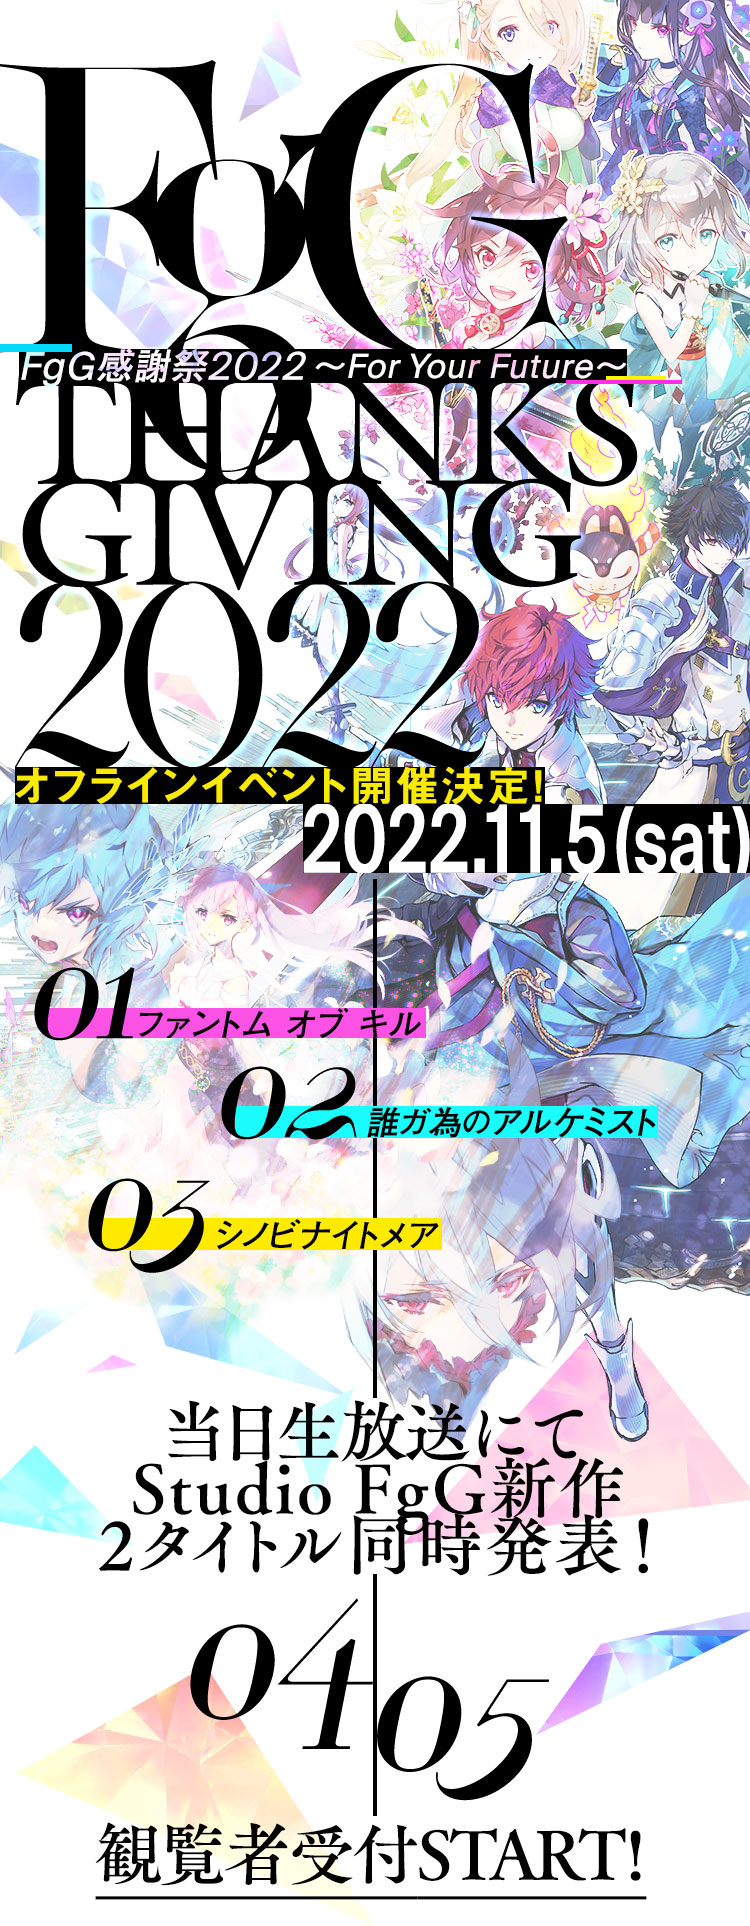 FgG感謝祭2022 ～For Your Future～